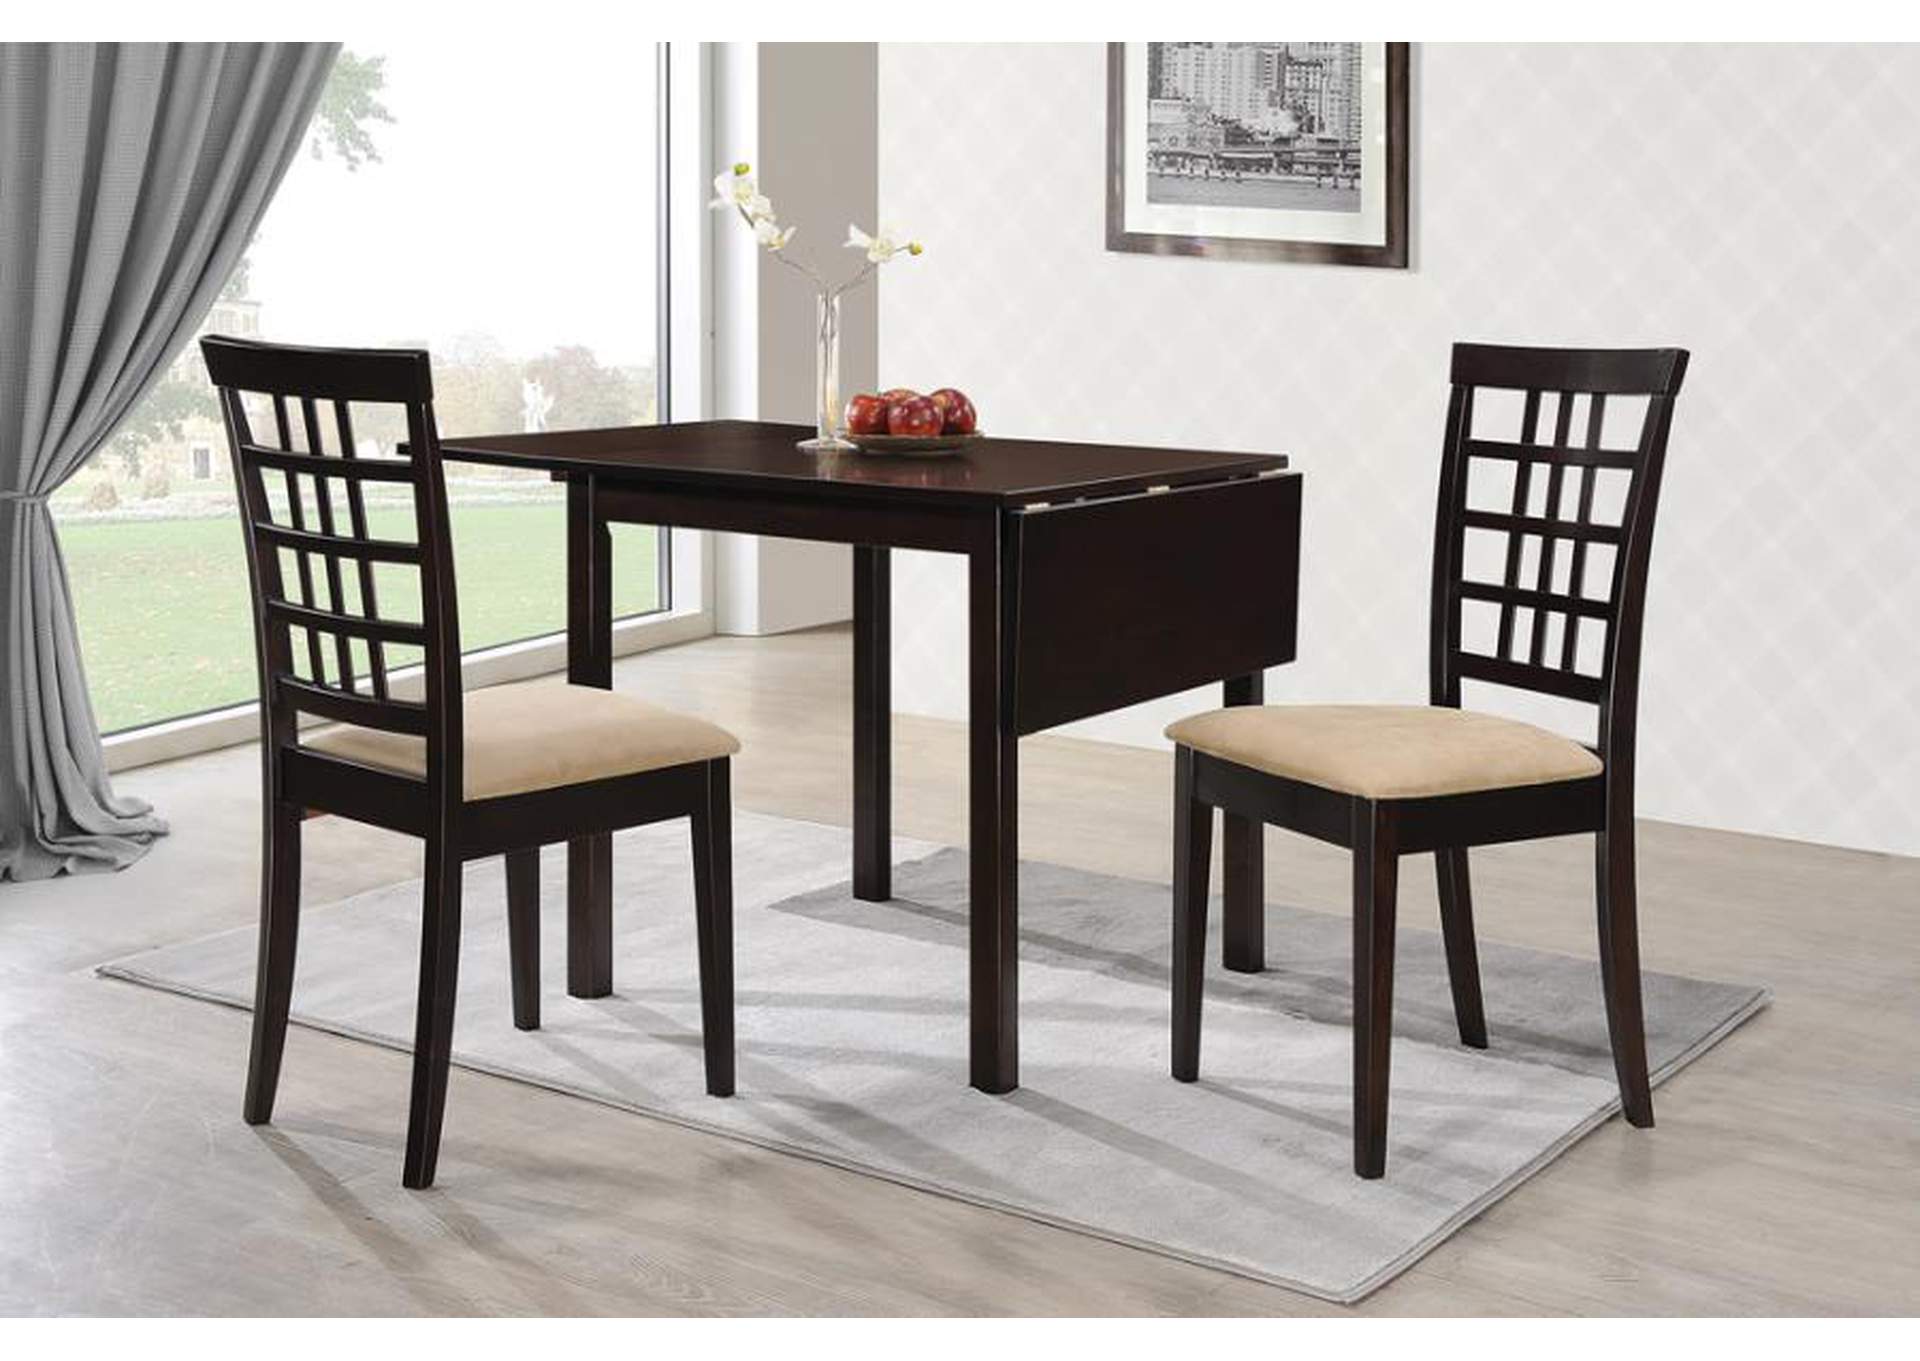 Kelso 3-Piece Drop Leaf Dining Set Cappuccino And Tan,Coaster Furniture